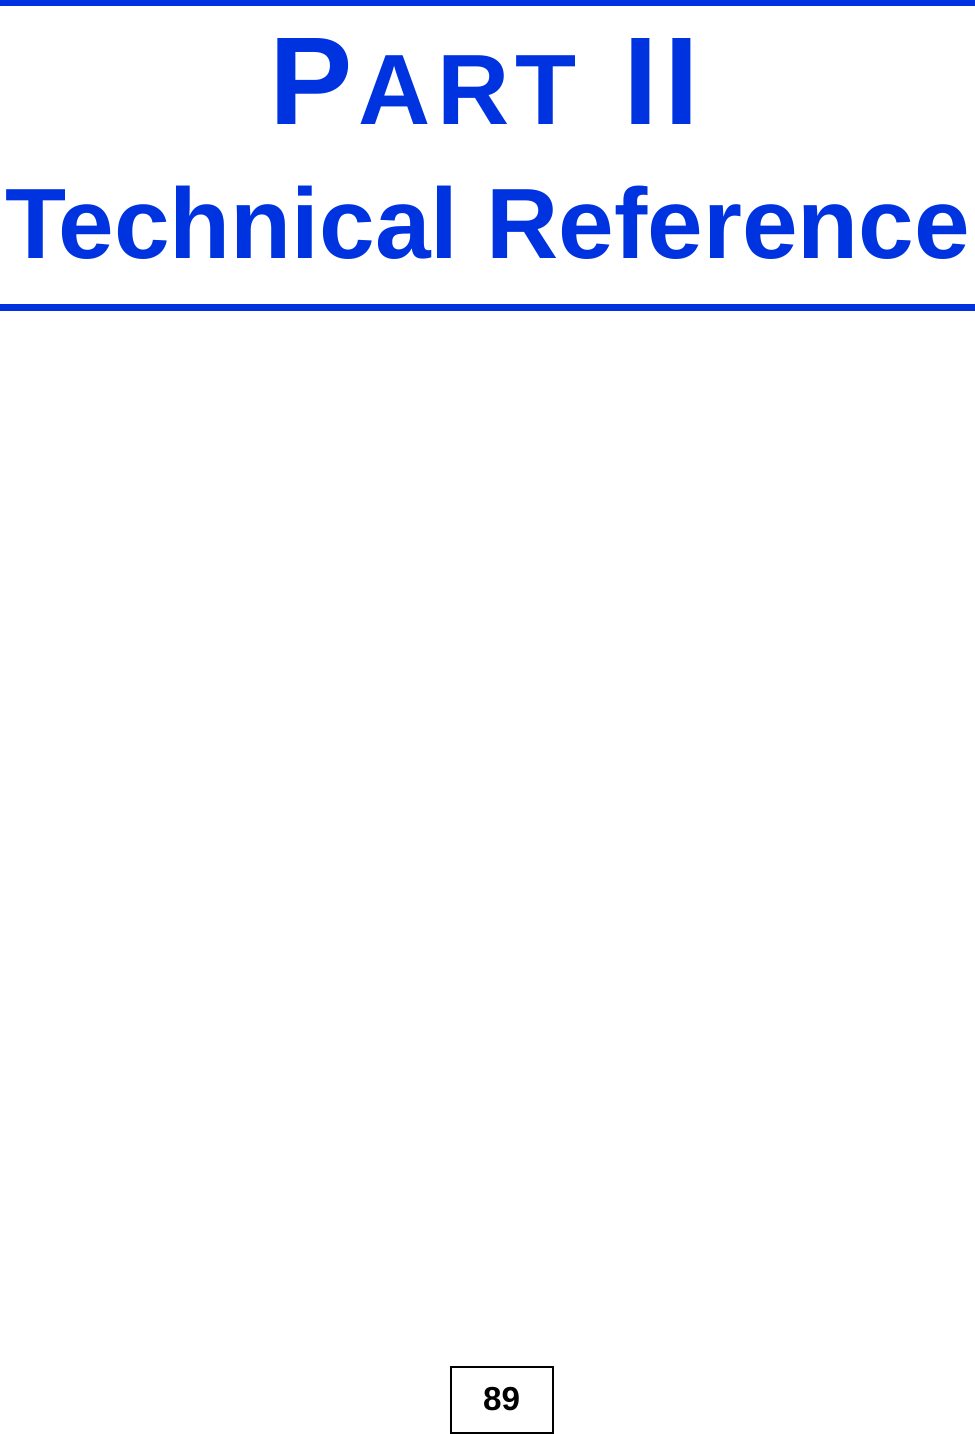 89PART IITechnical Reference